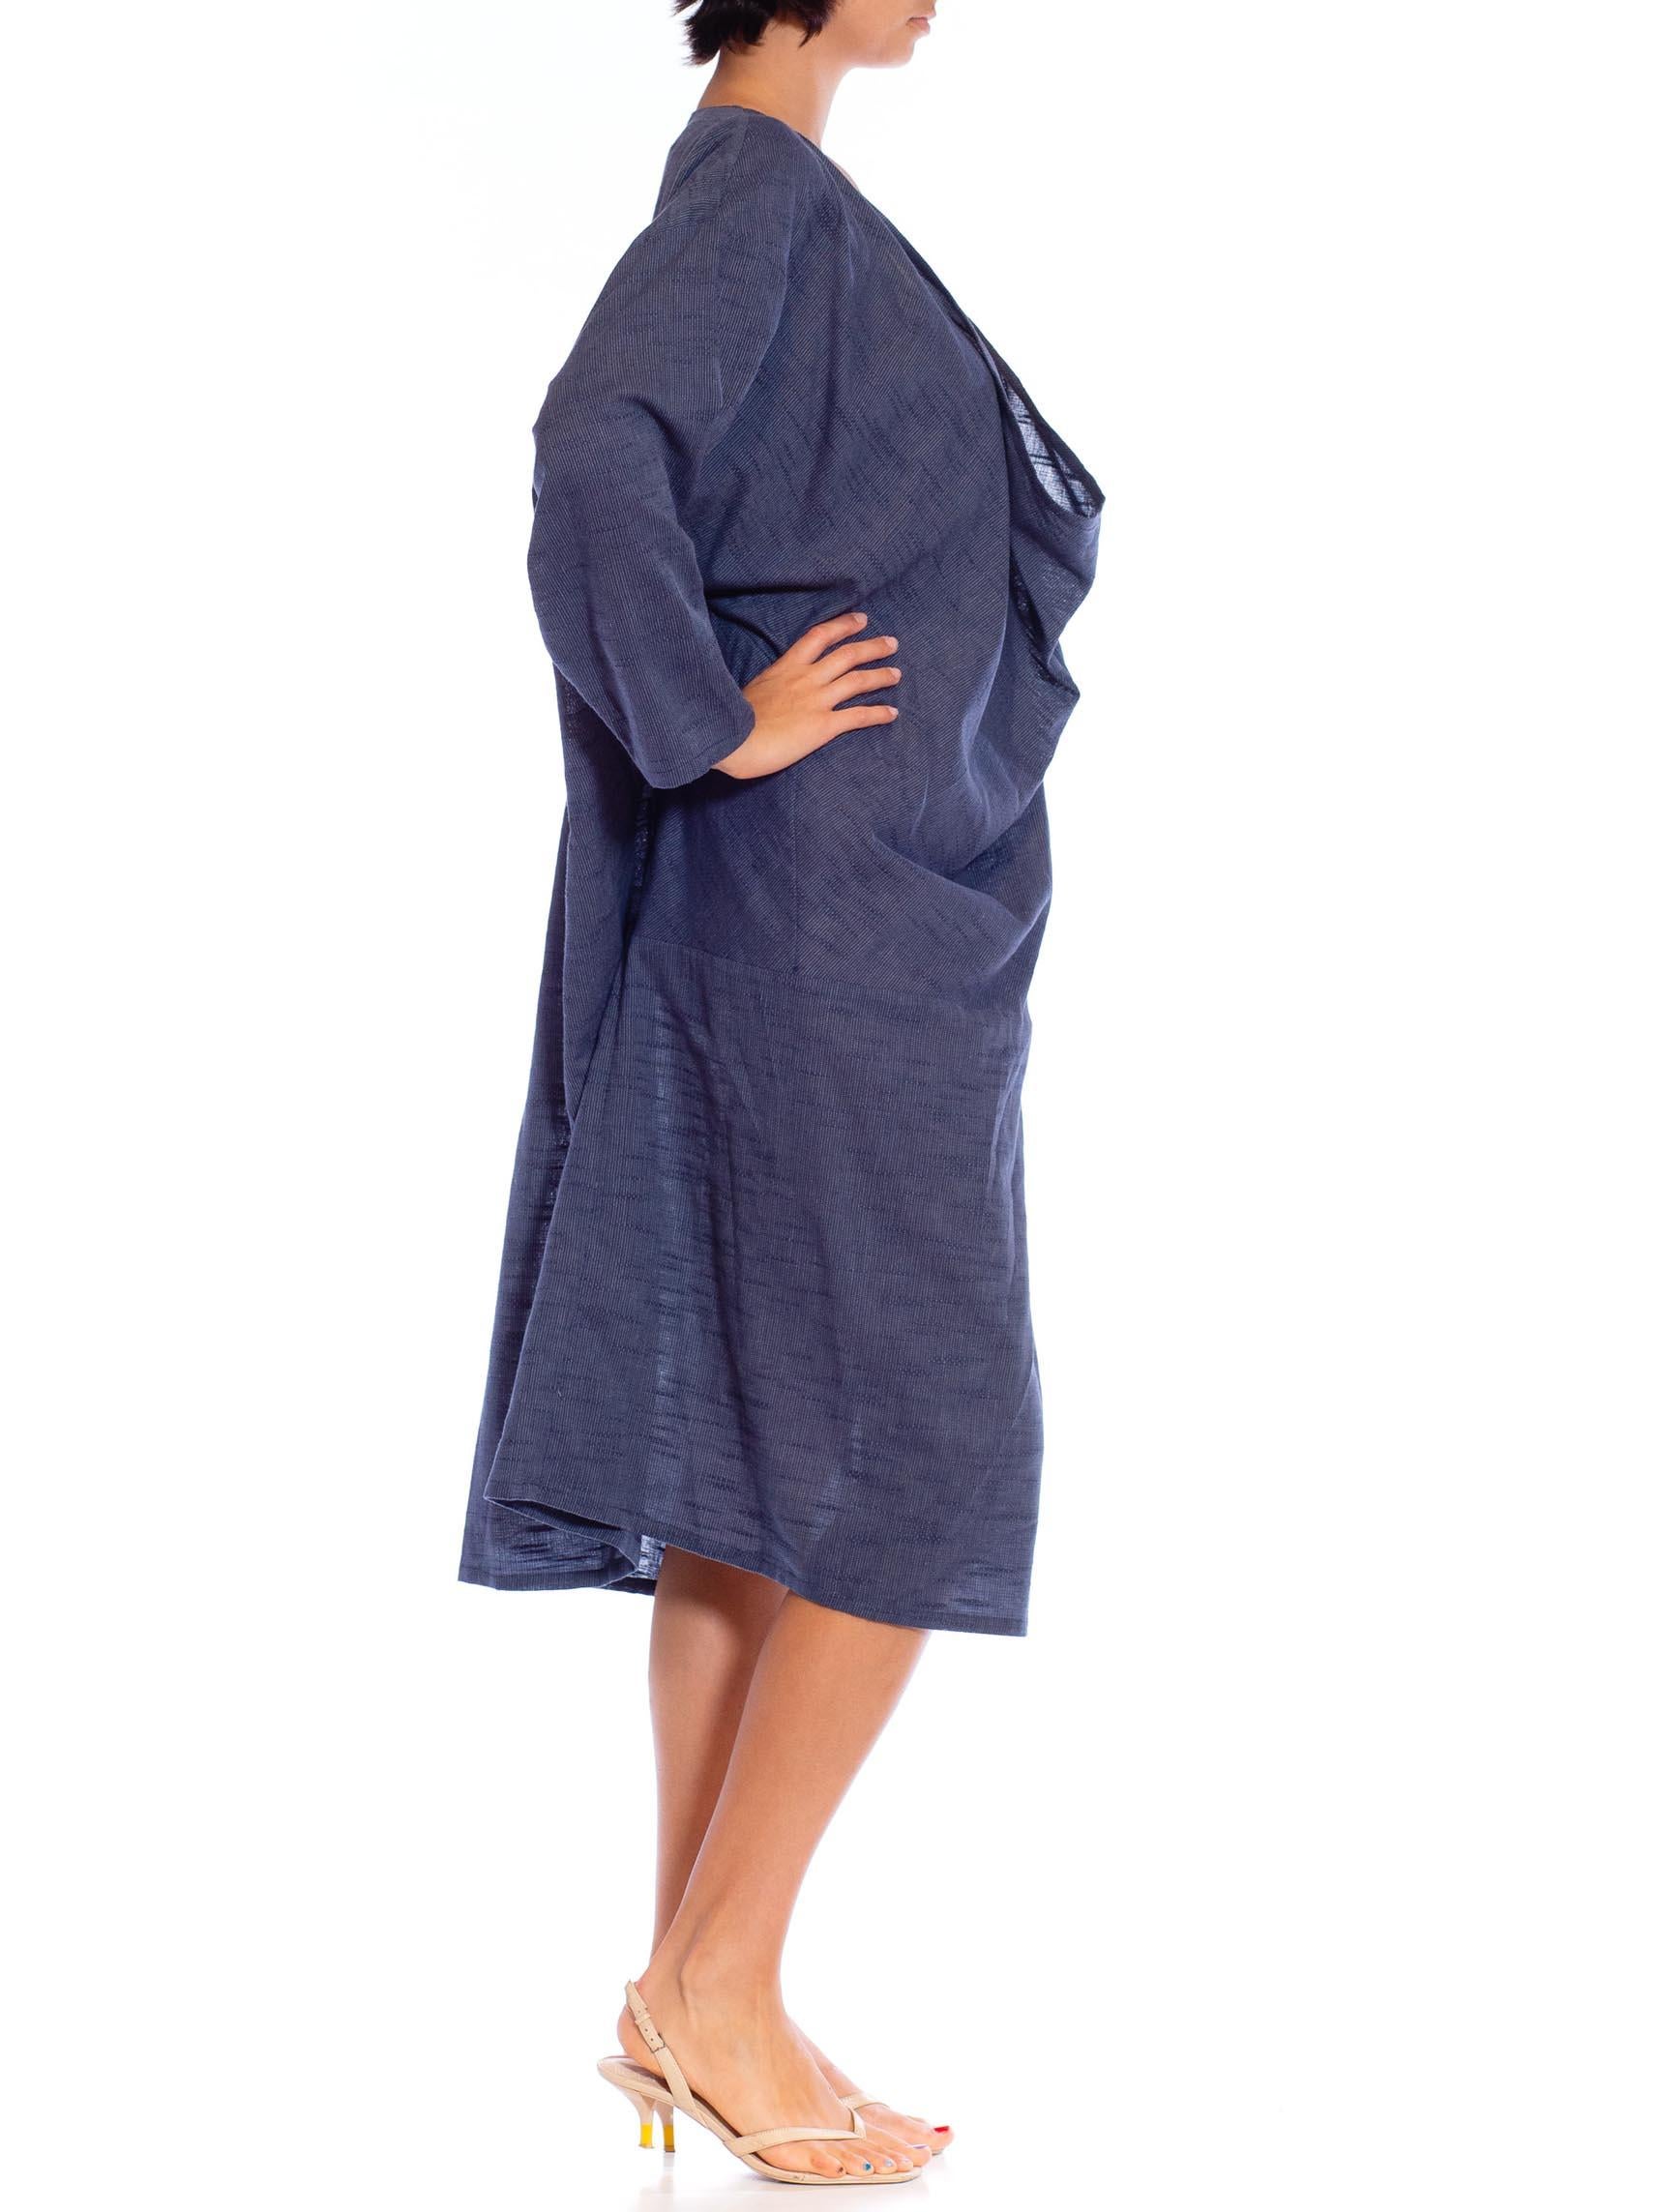 MORPHEW COLLECTION Indigo Blue Cotton Unisex Cowl Neck Tunic Kaftan In Excellent Condition For Sale In New York, NY